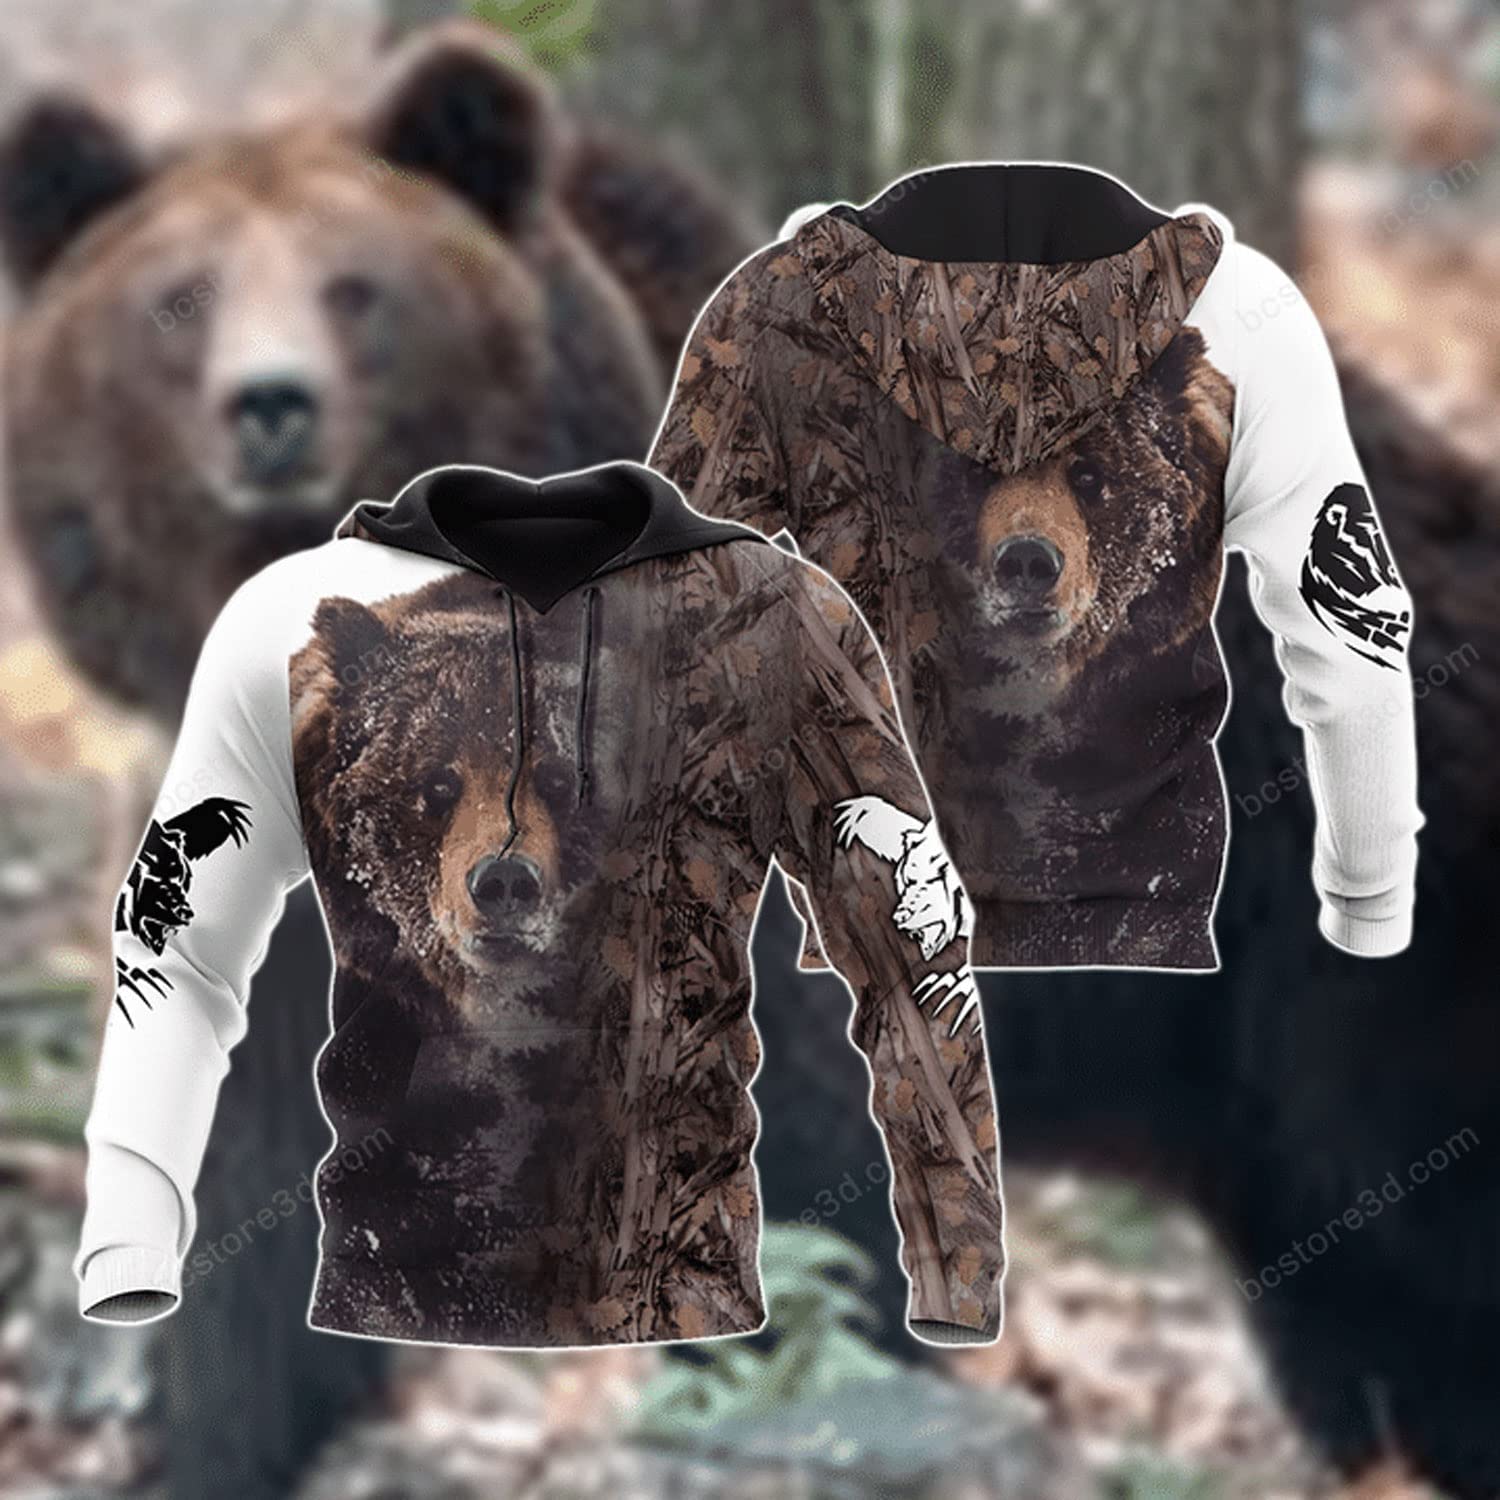 Bear Hunting 3D Full Print Shirt: Perfect Gift for Bear Hunter Lovers and Families – JOT1530